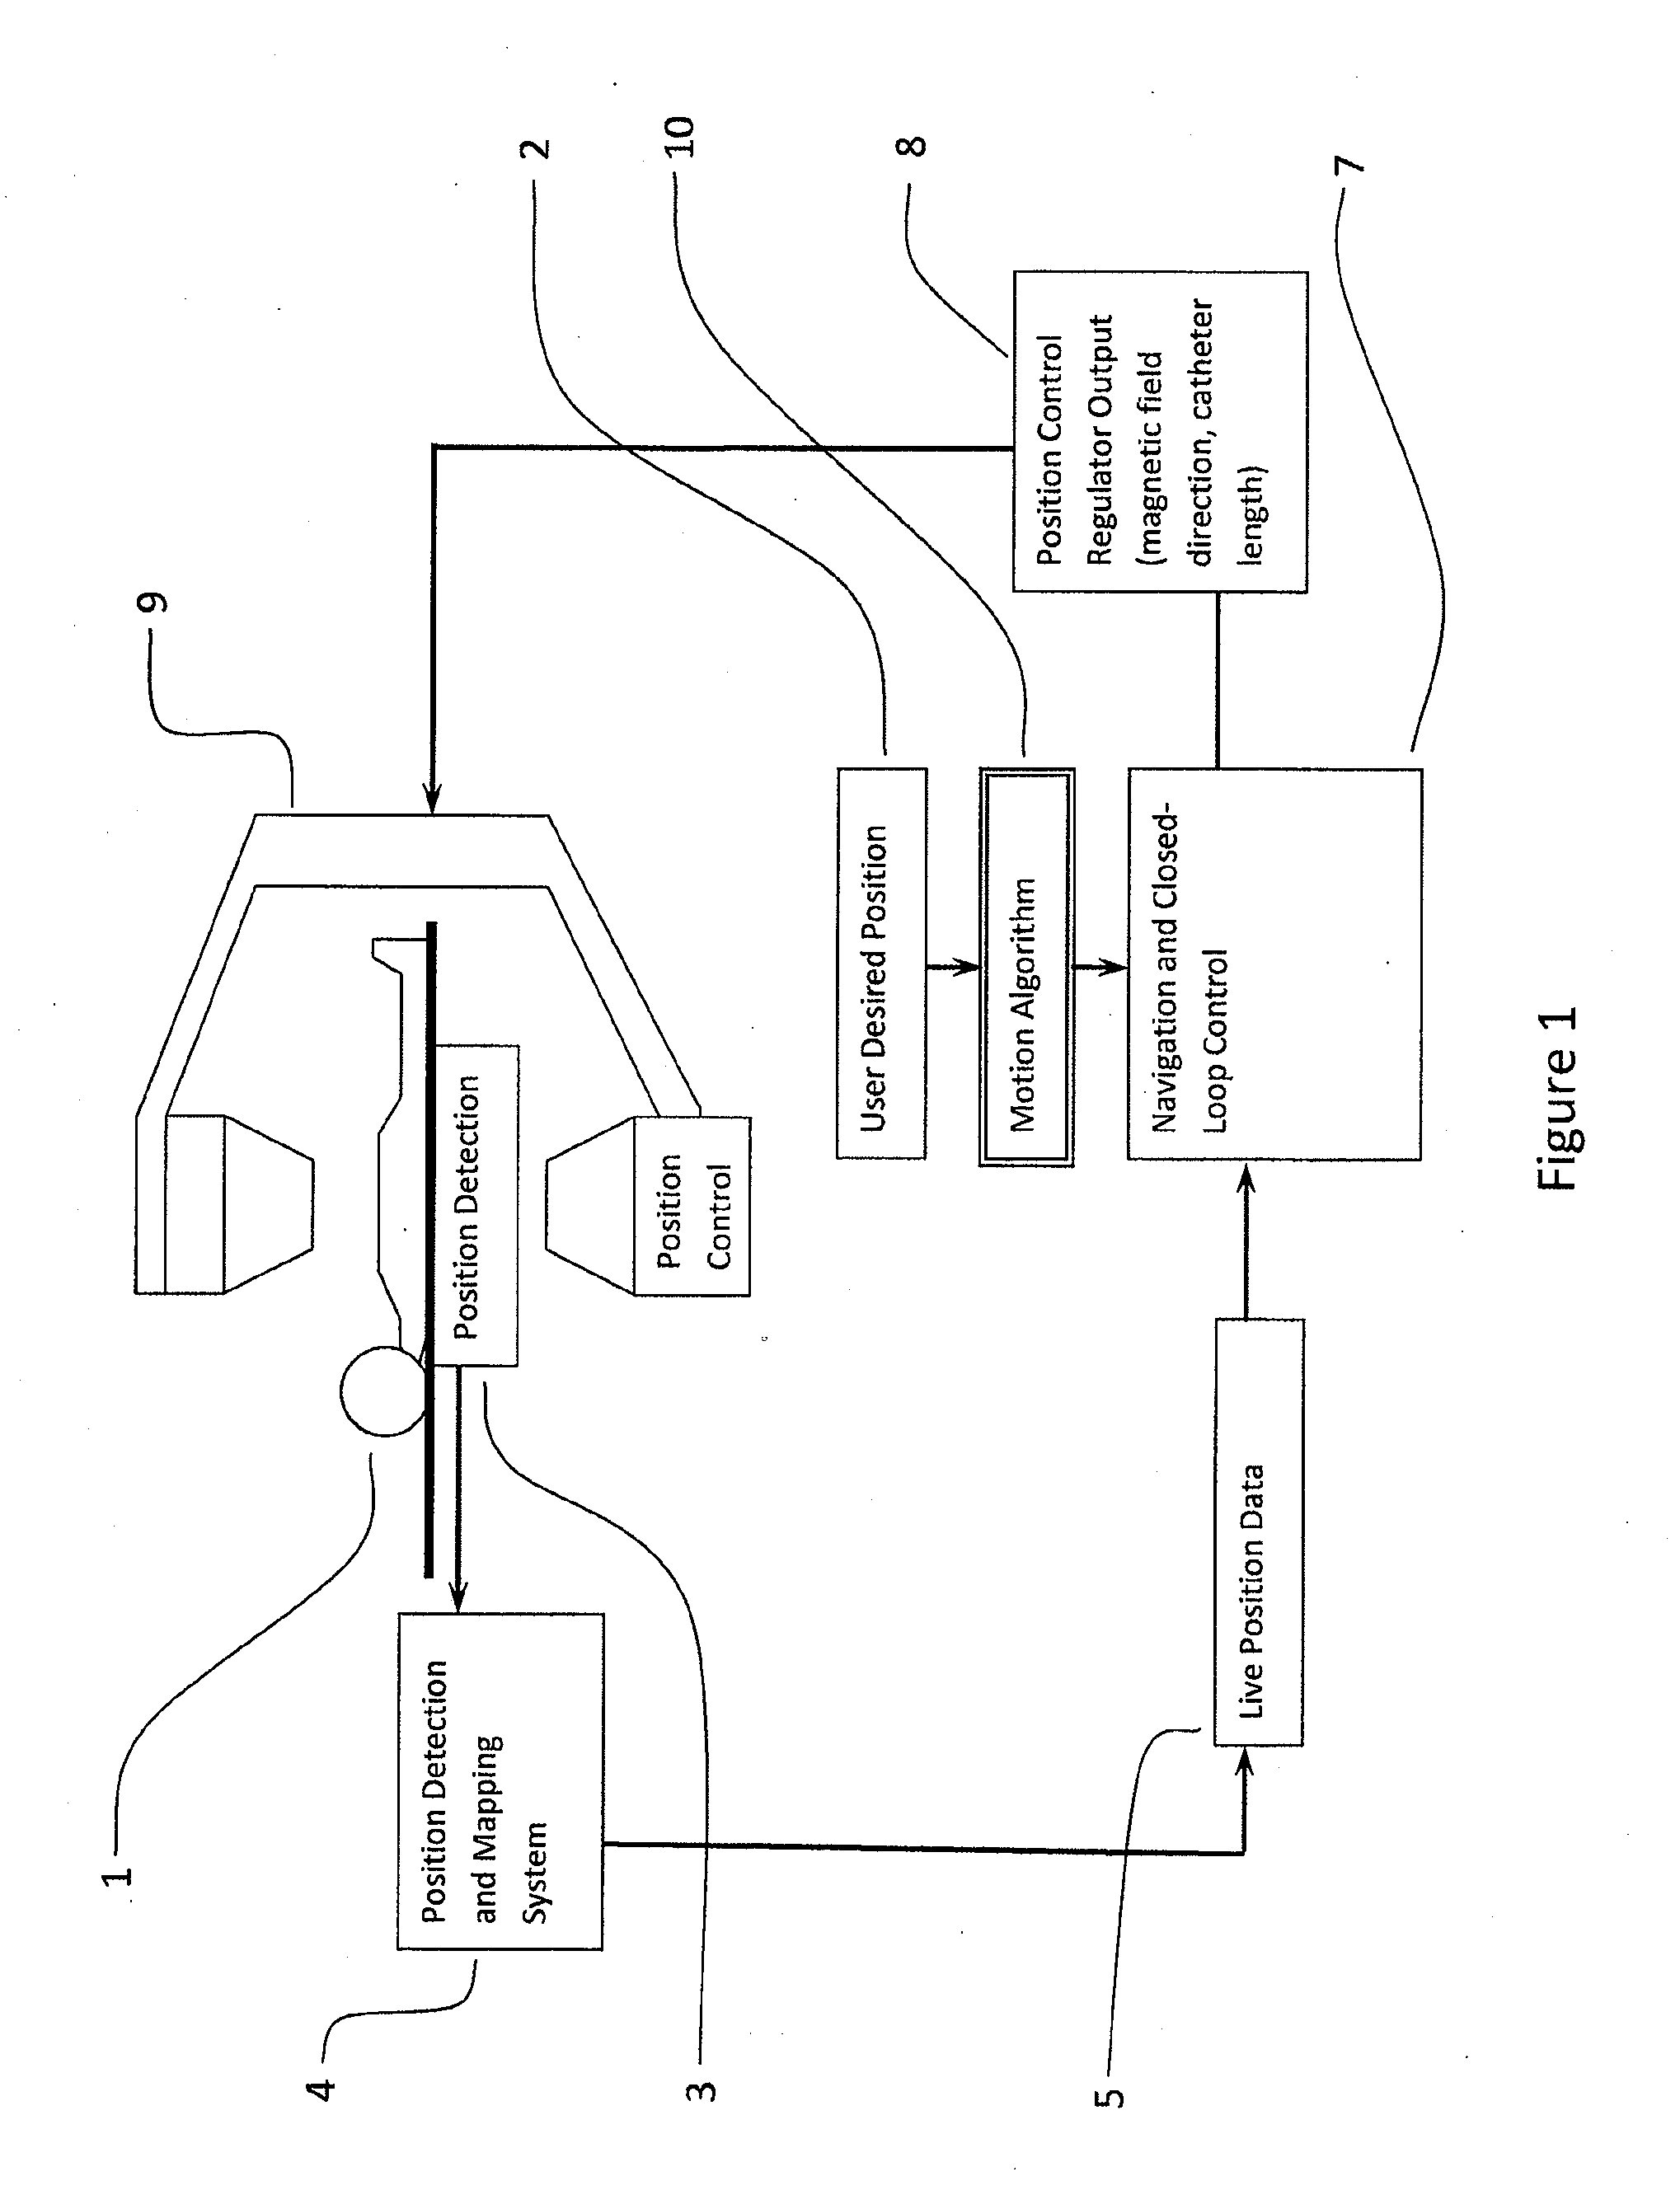 Method for acquiring high density mapping data with a catheter guidance system